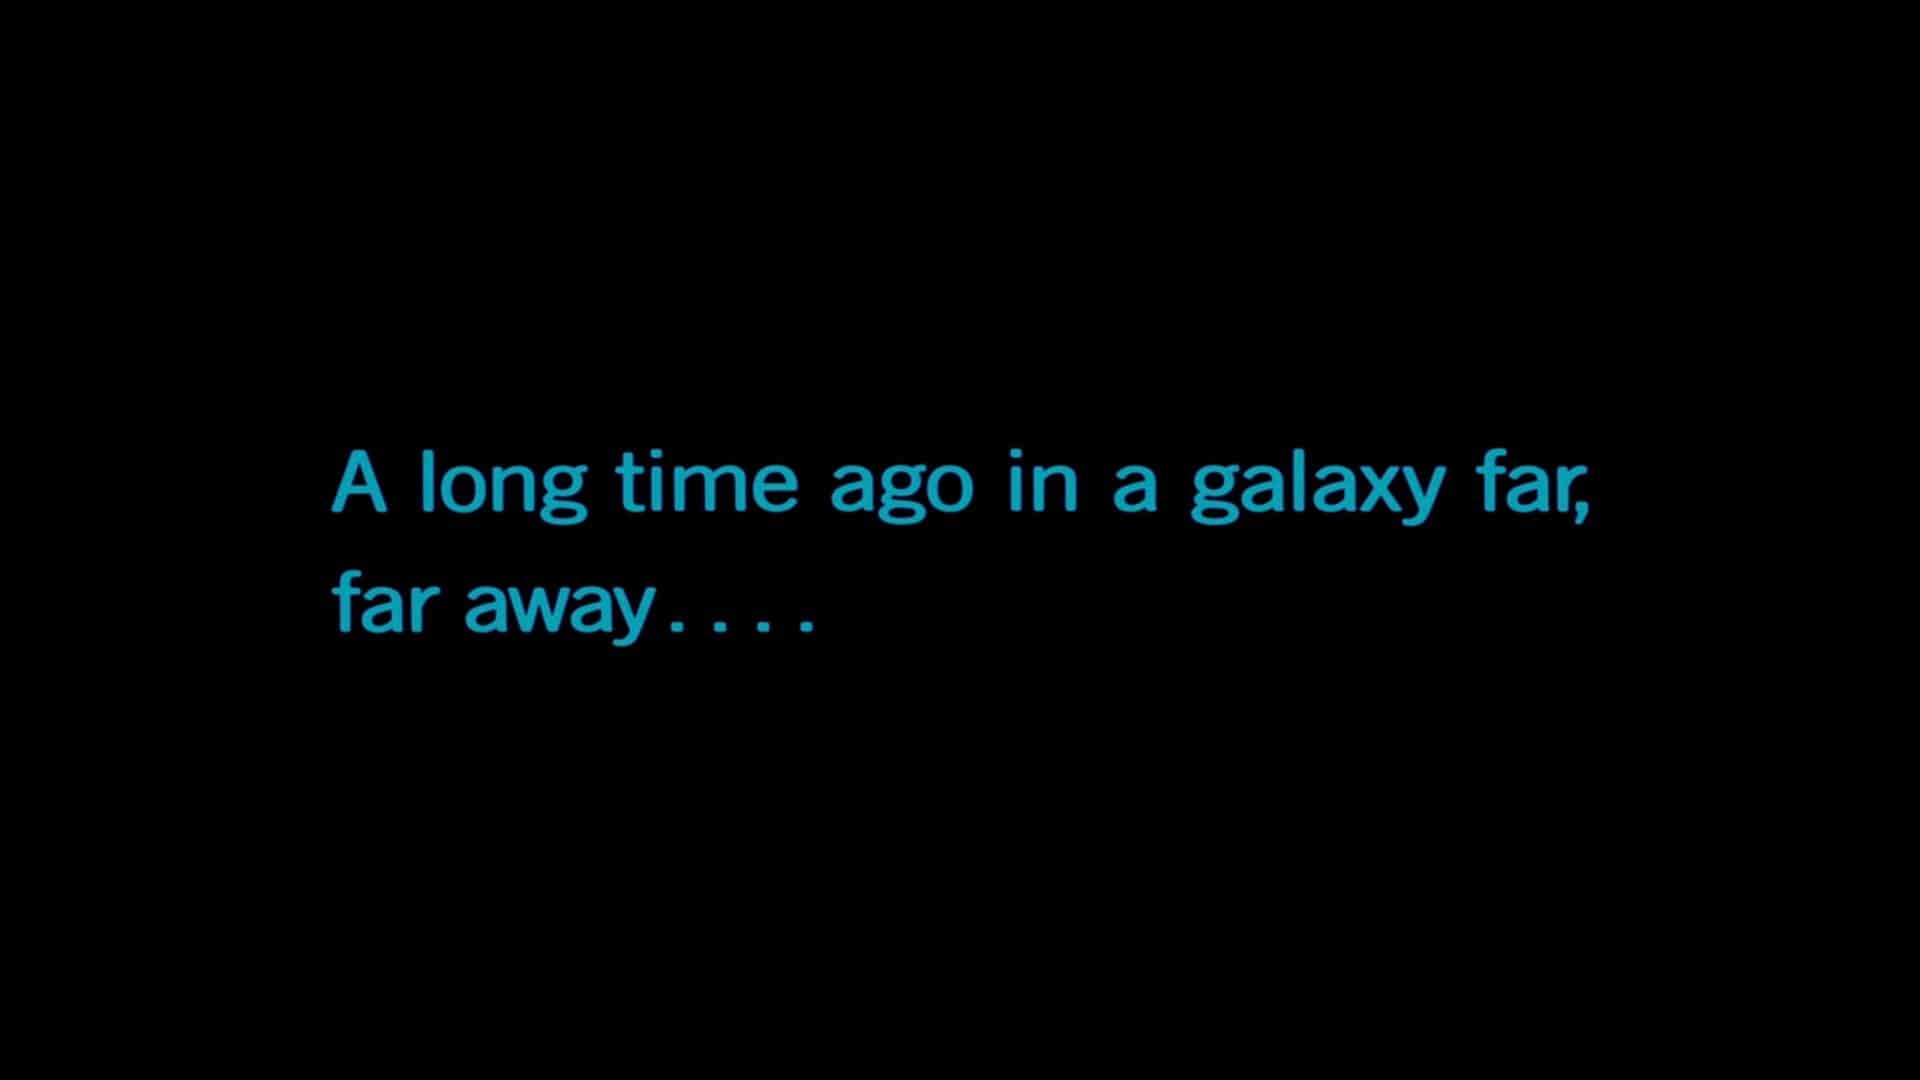 Star Wars opening crawl with four dots in the beginning - Four-Dot Ellipsis